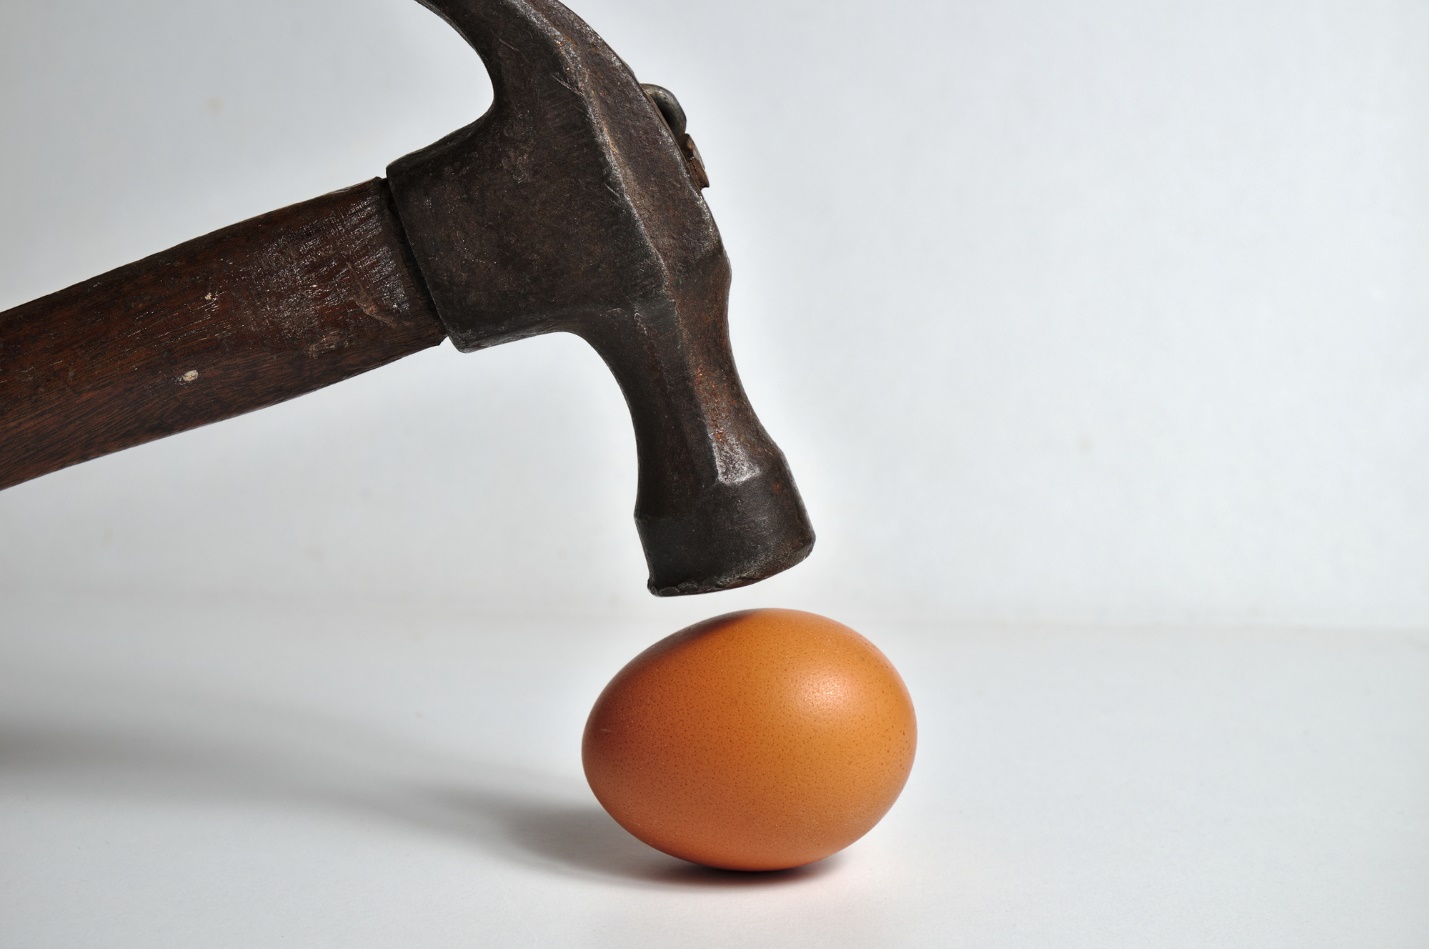 A hammer hitting an egg

Description automatically generated